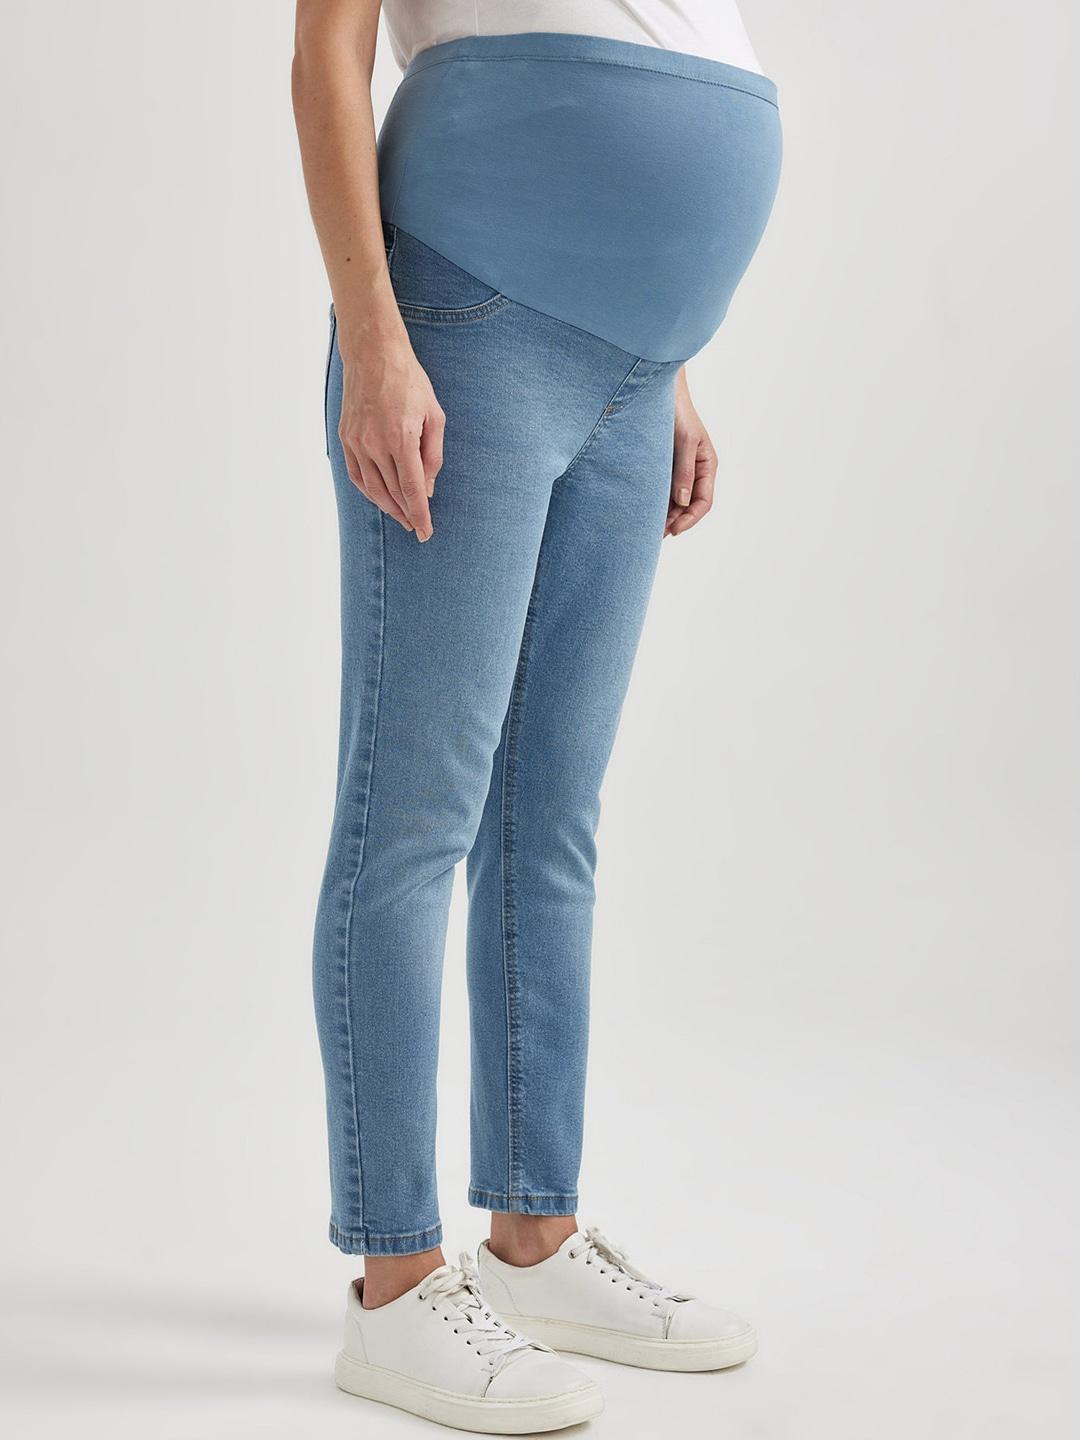 DeFacto Women Maternity High-Rise Clean Look Stretchable Jeans